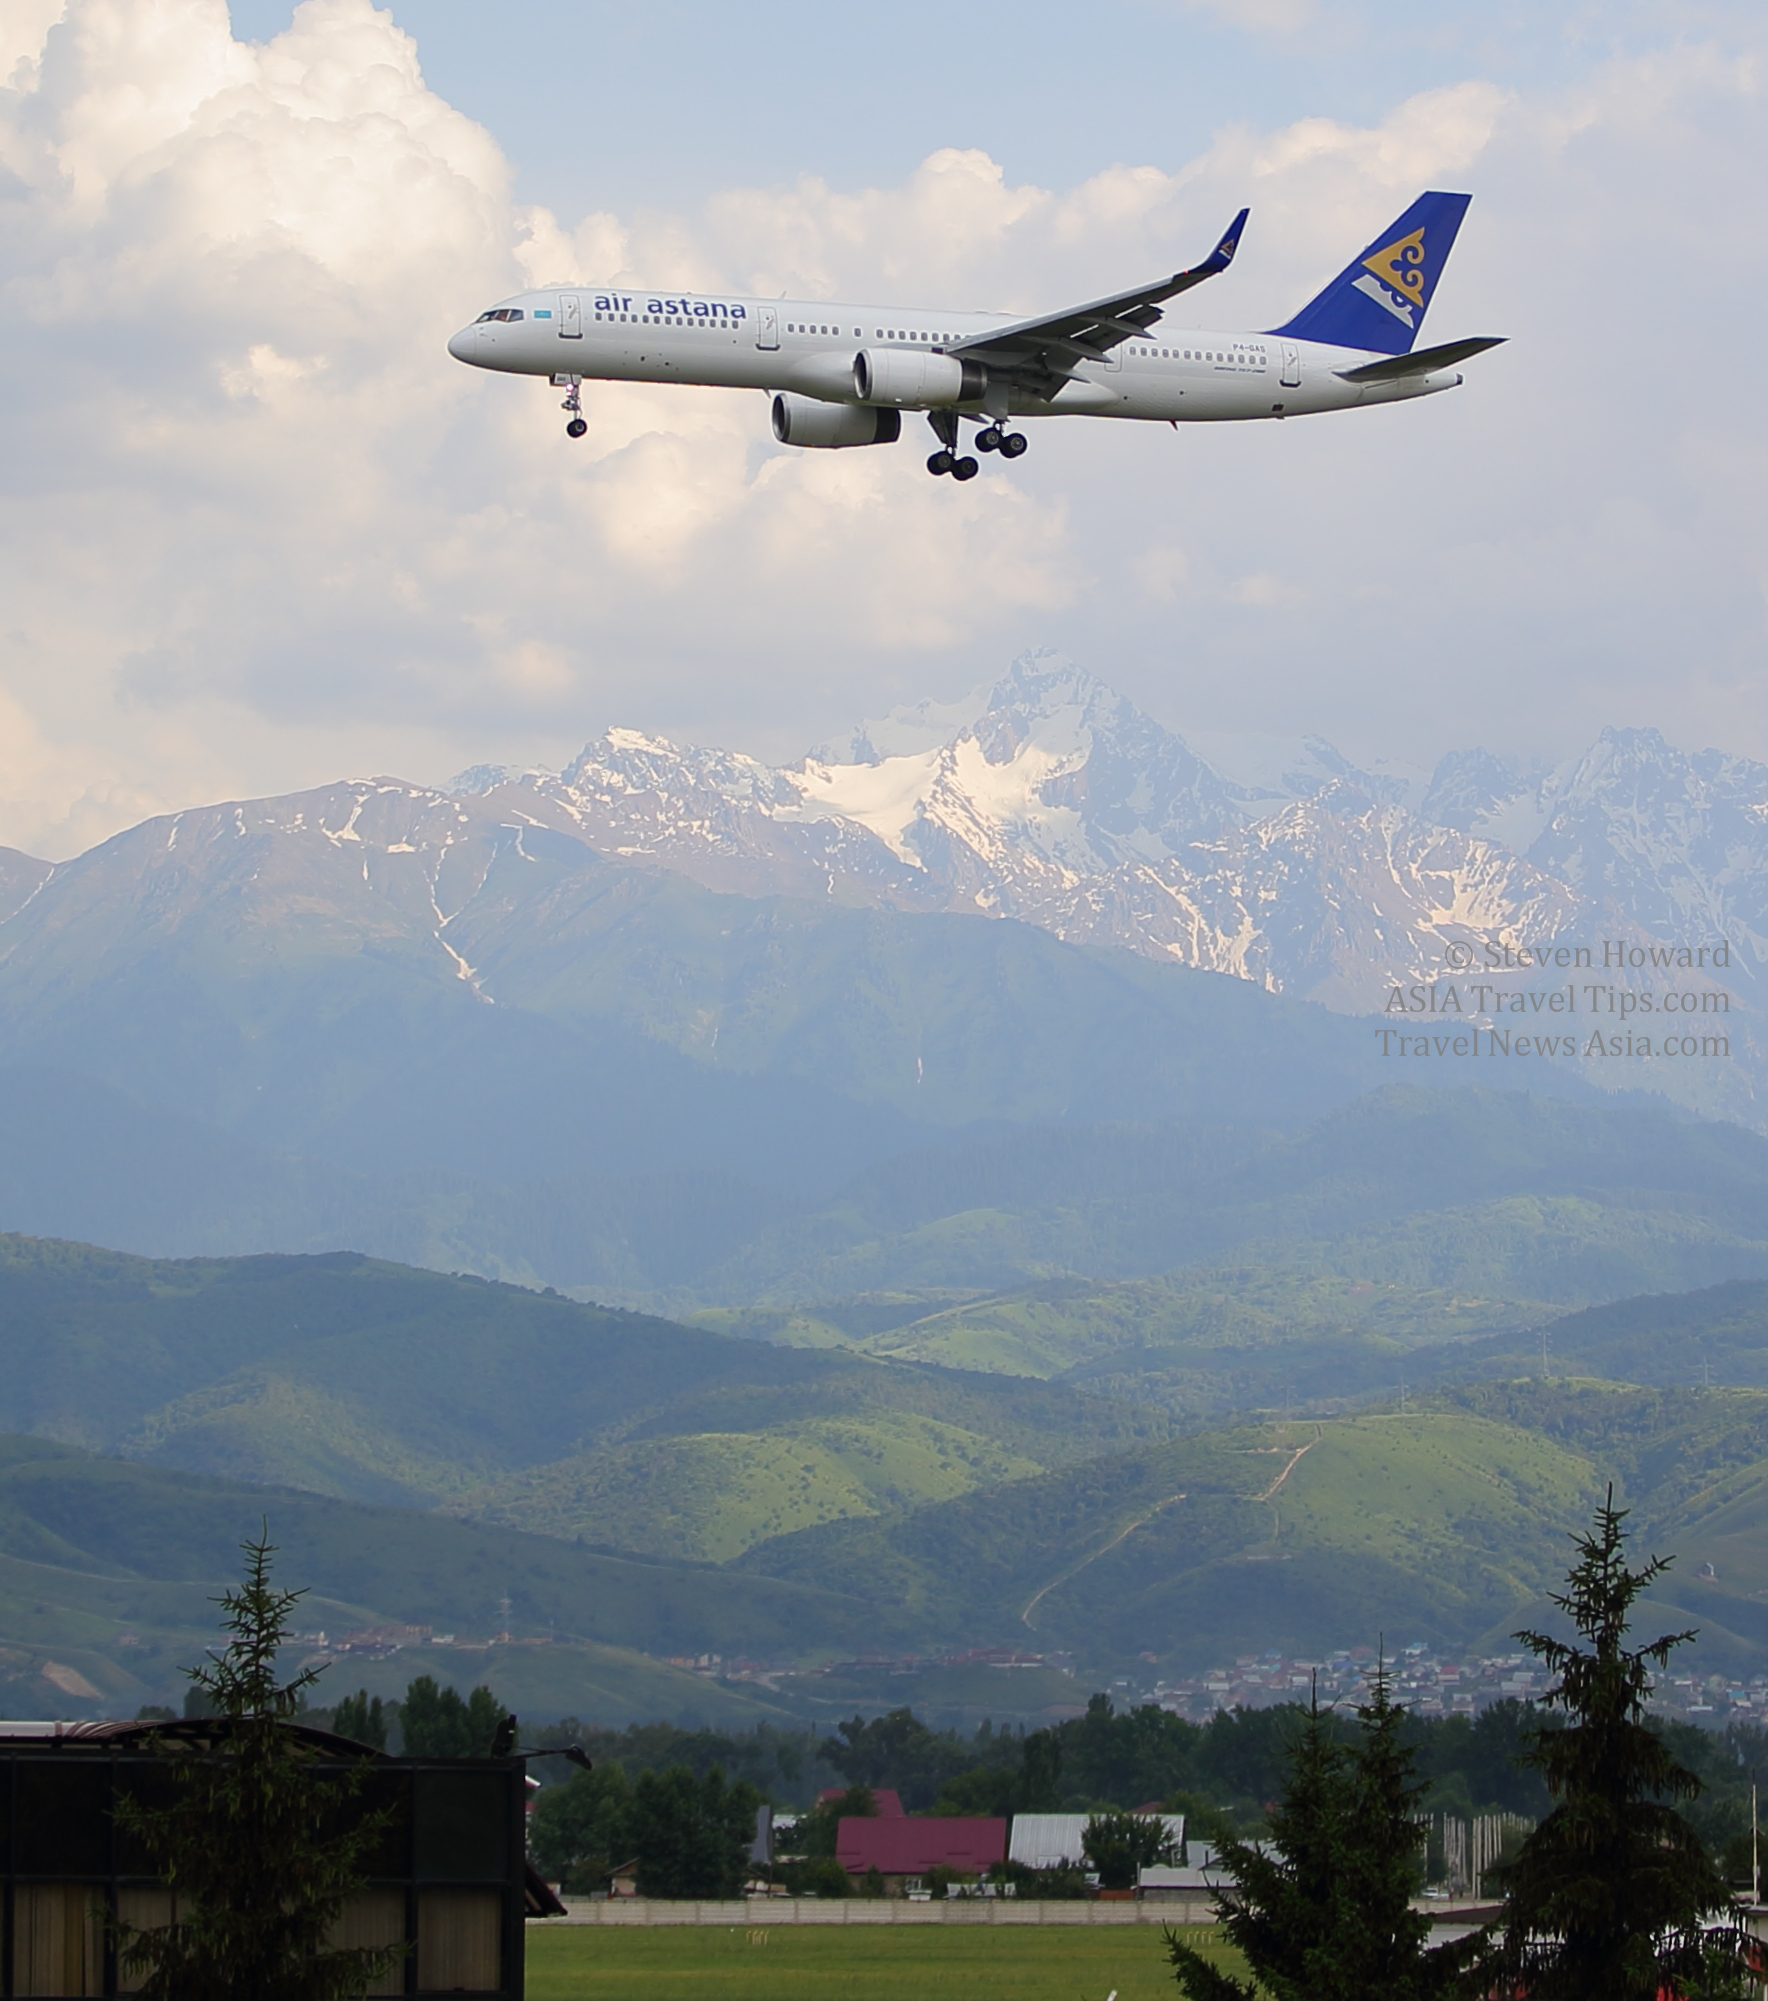 Air Astana aircraft coming in to land at Almaty, Kazakhstan. Click to enlarge.